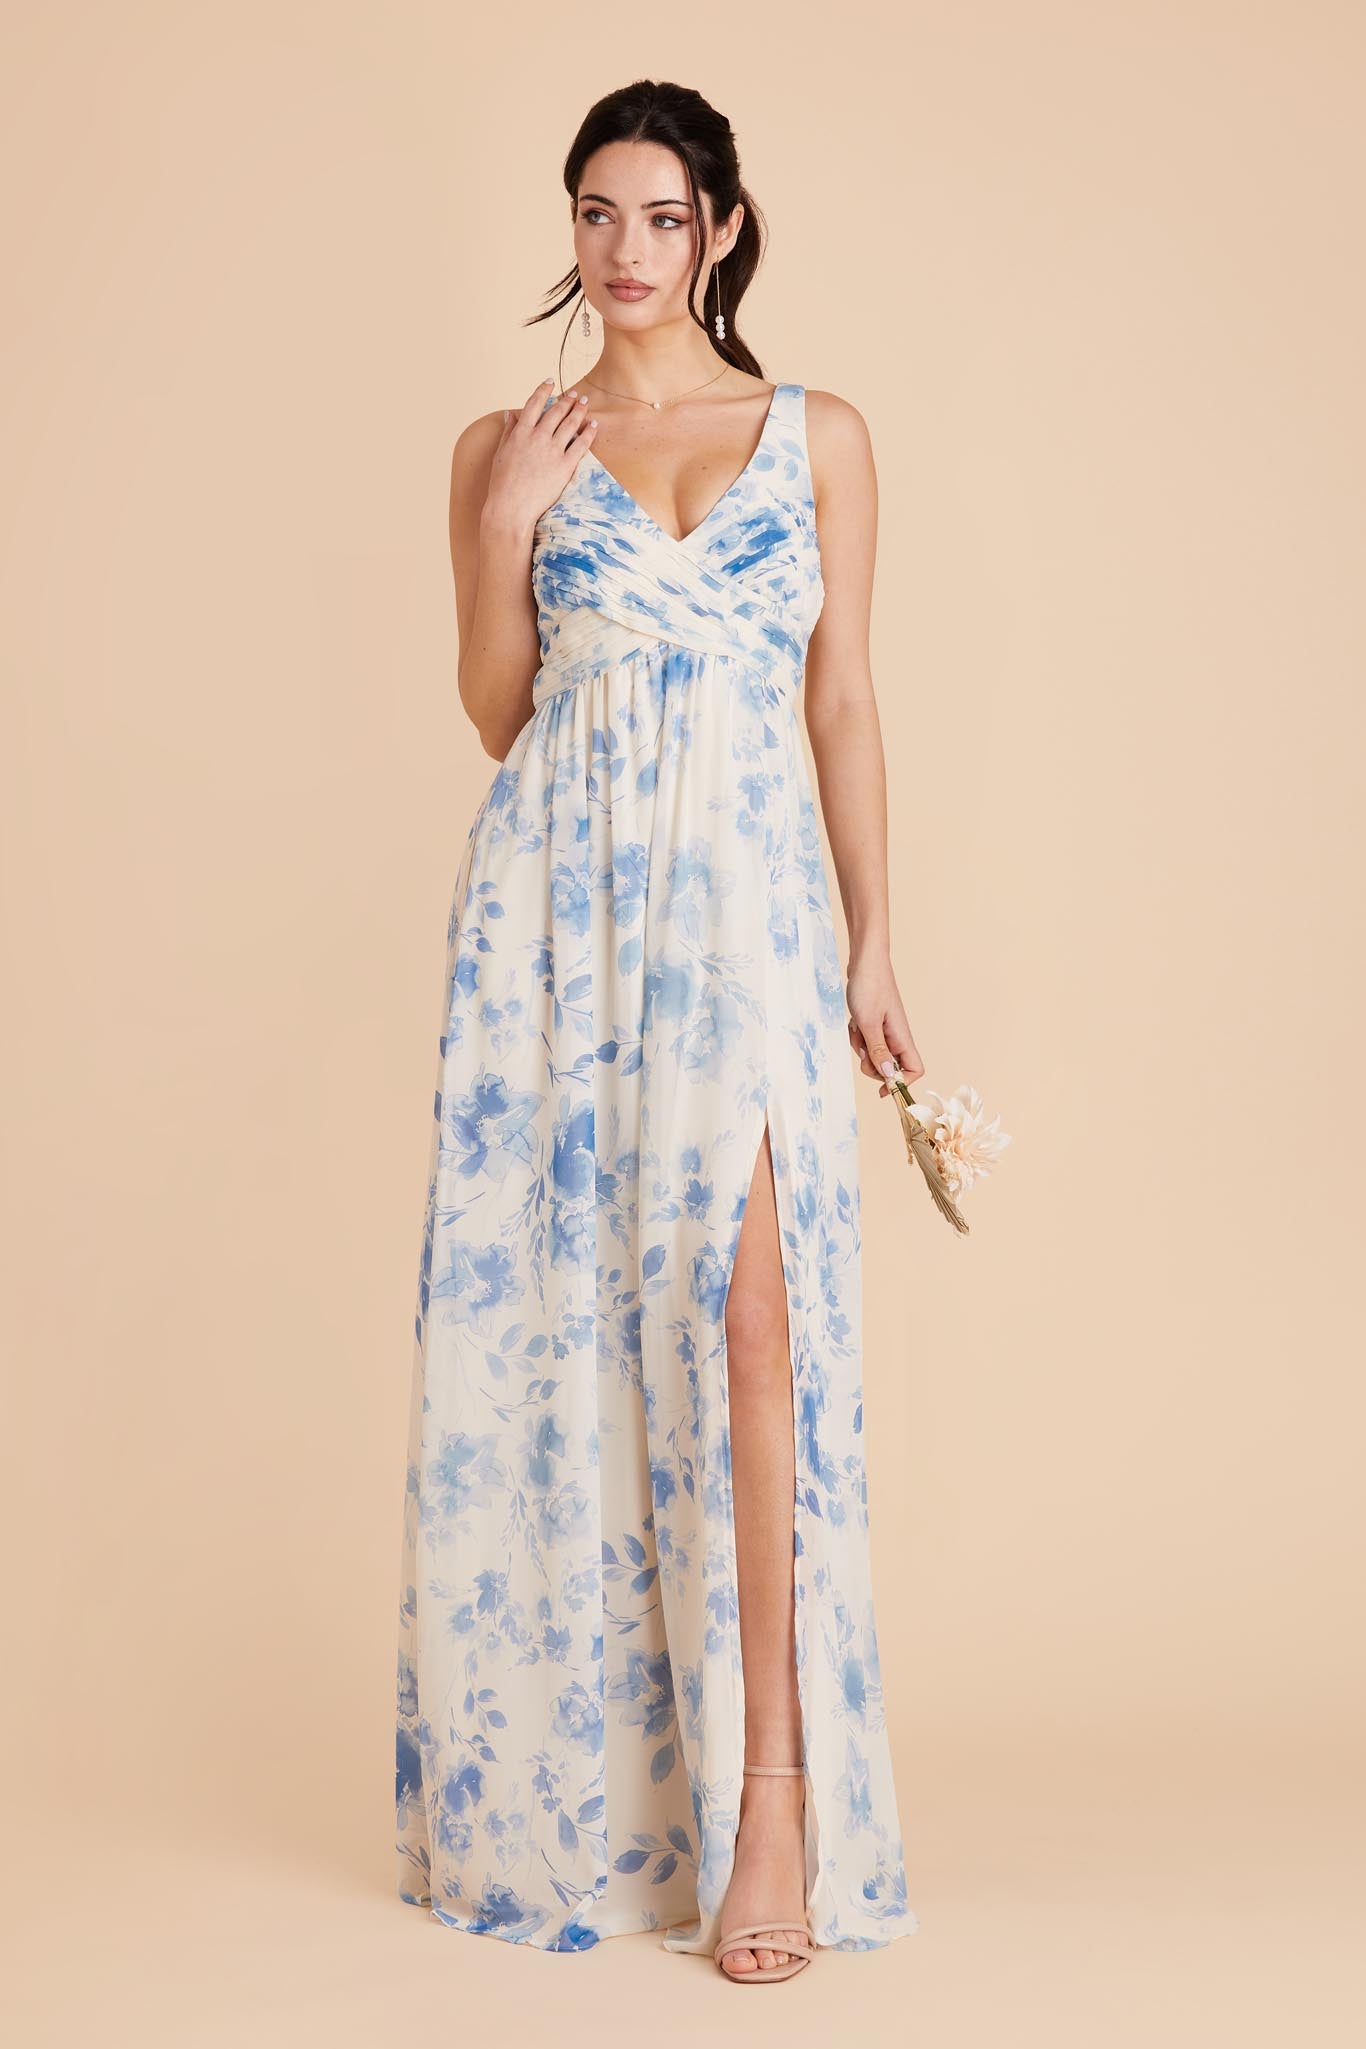 Blue Rococo Floral Laurie Empire Dress by Birdy Grey